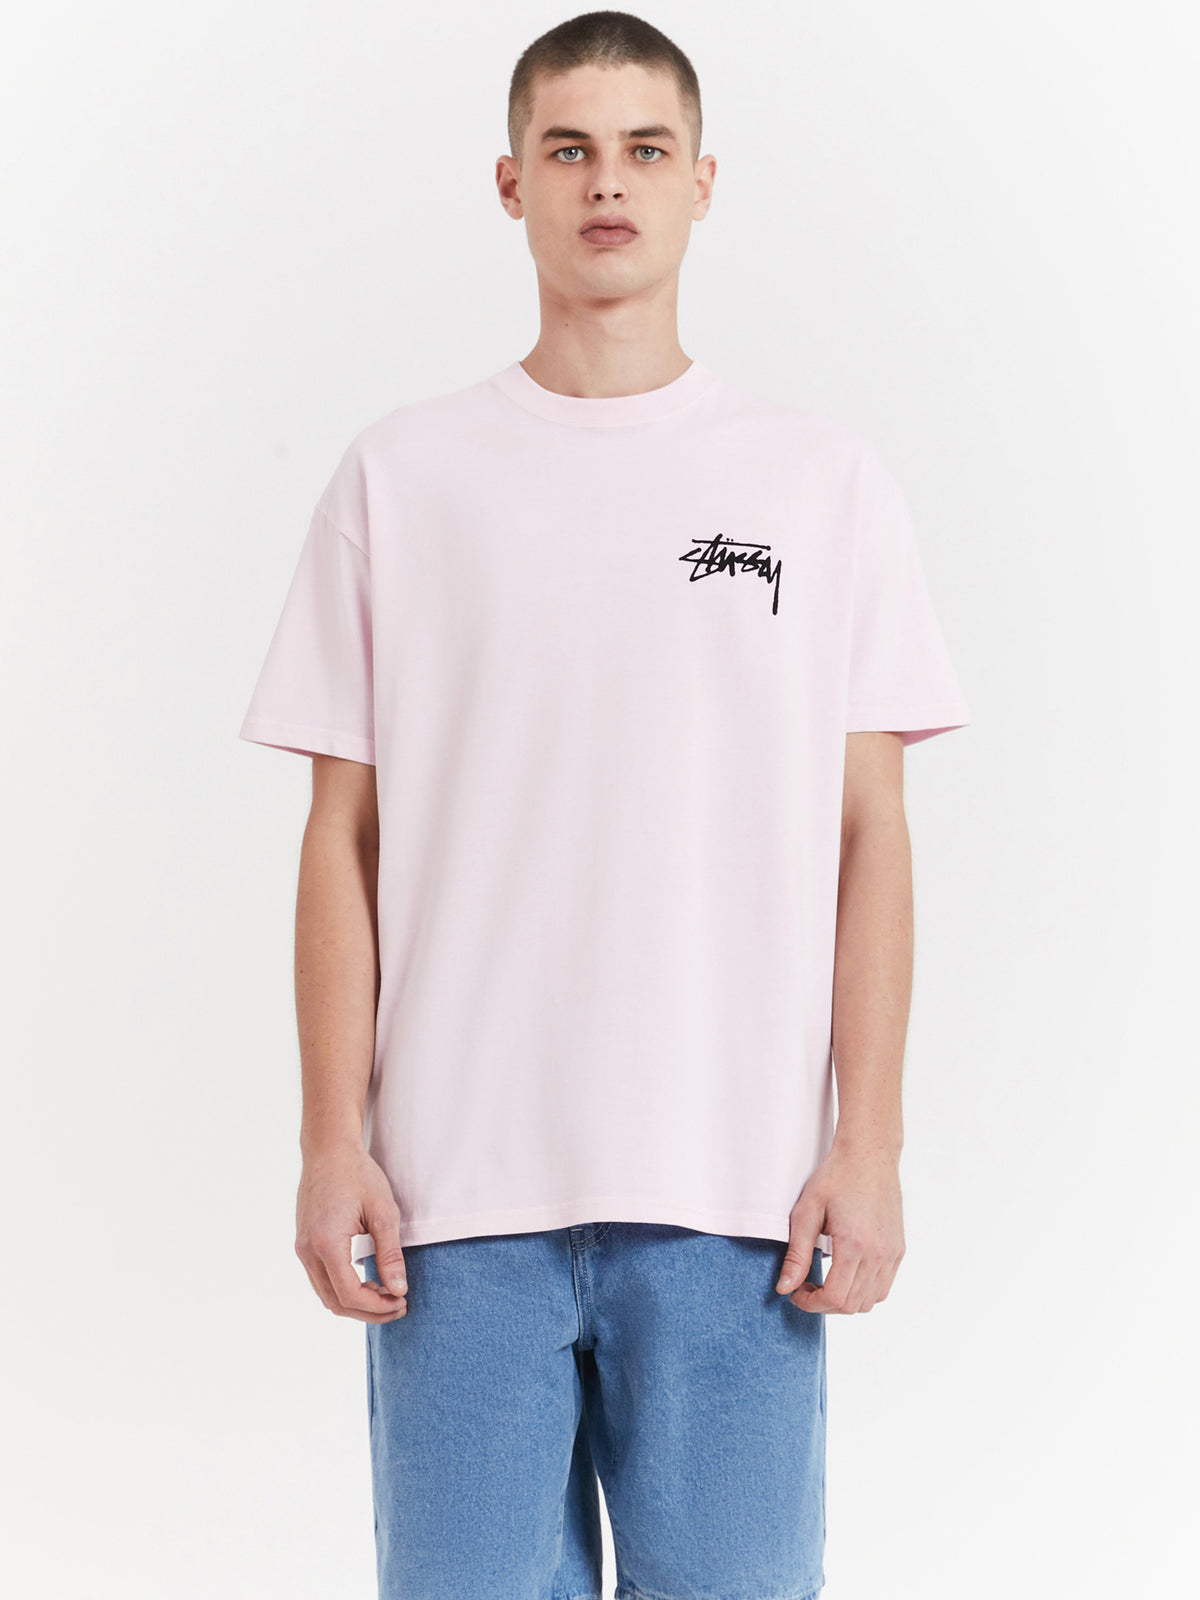 Read Em N Weep Heavyweight T-Shirt in Pigment Pink